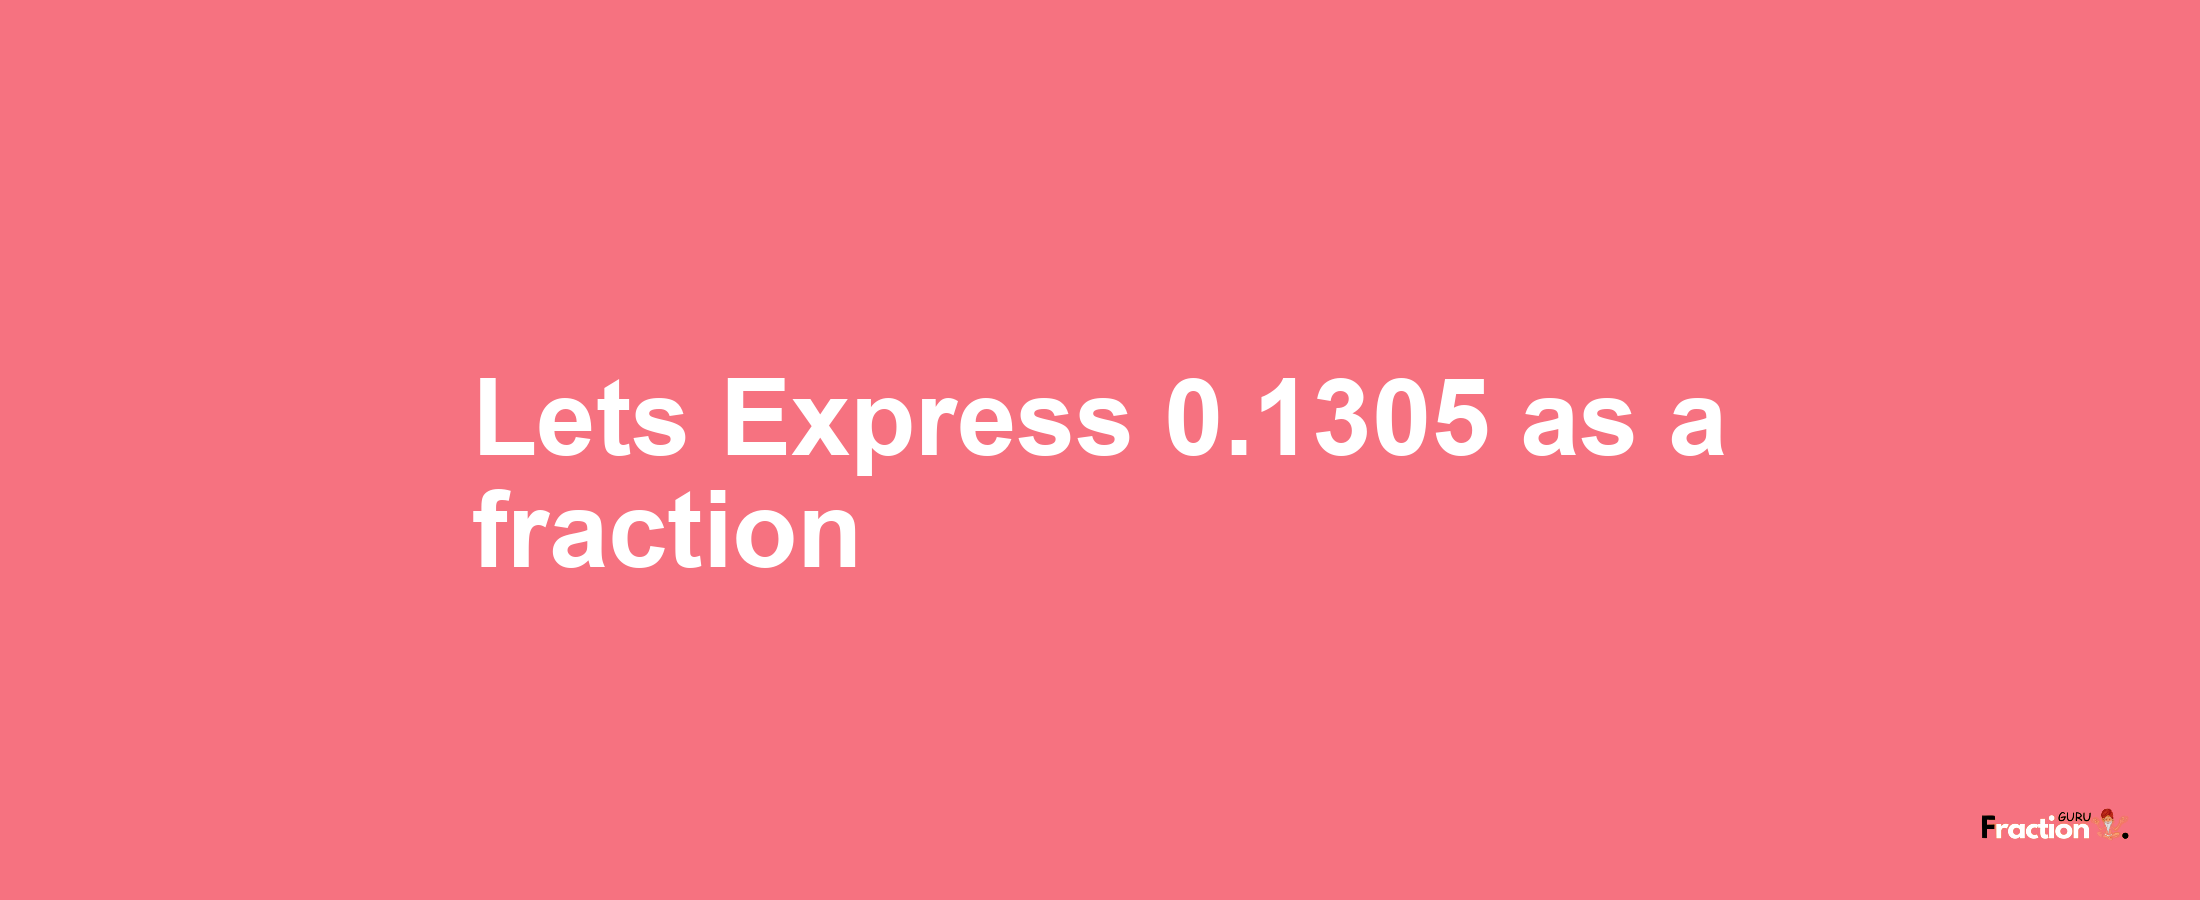 Lets Express 0.1305 as afraction